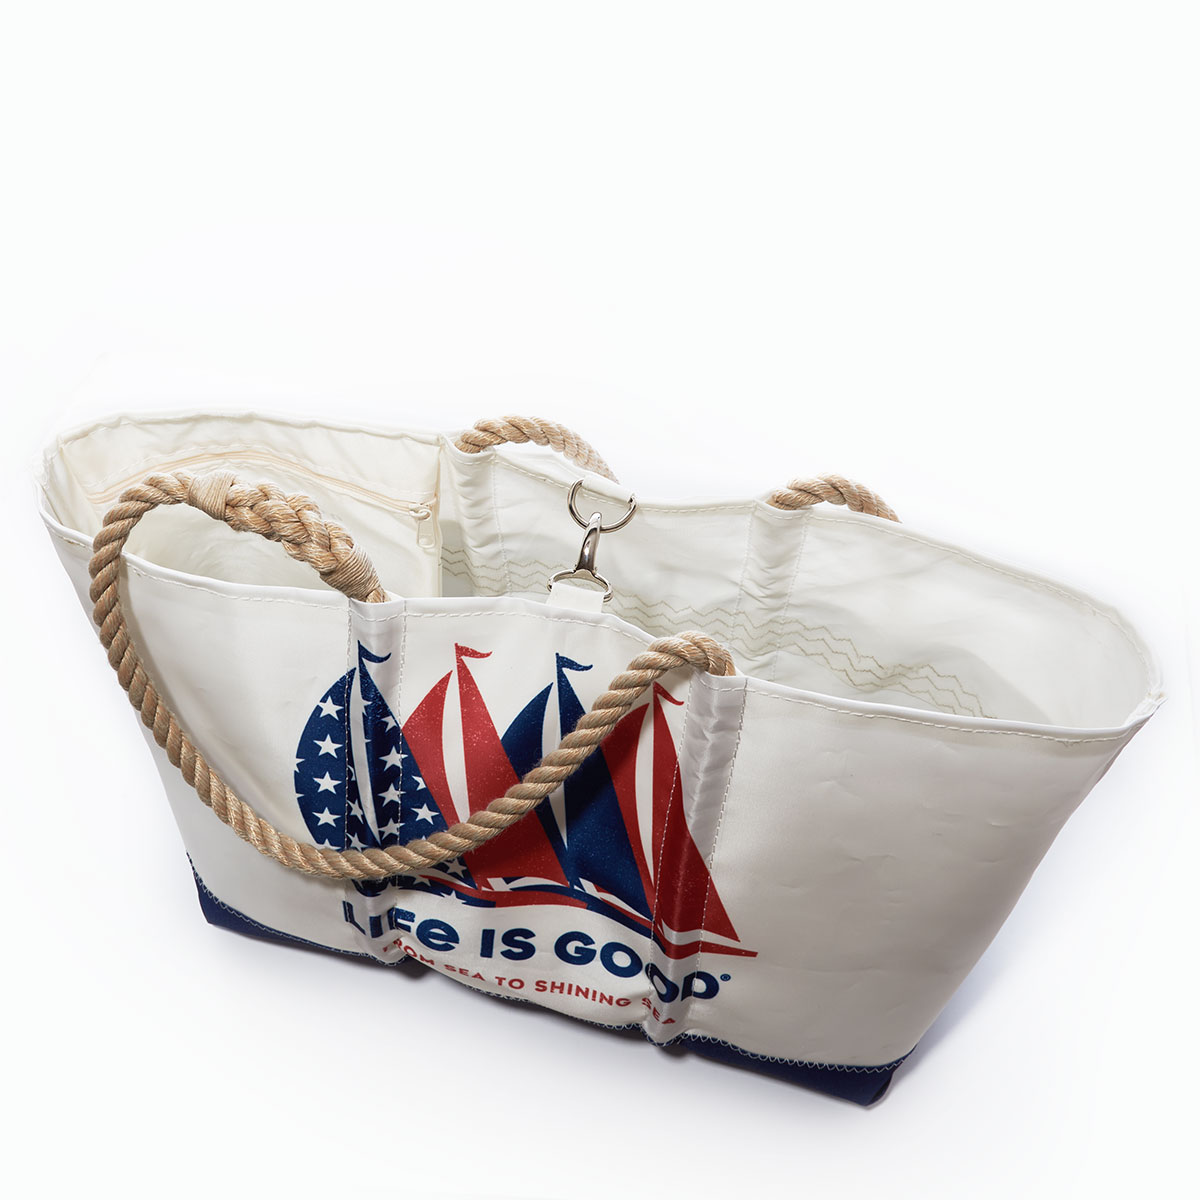 clasp closure of four sailboats in patriotic red and blue printed on white recycled sail cloth beach tote with navy bottom and hemp rope handles